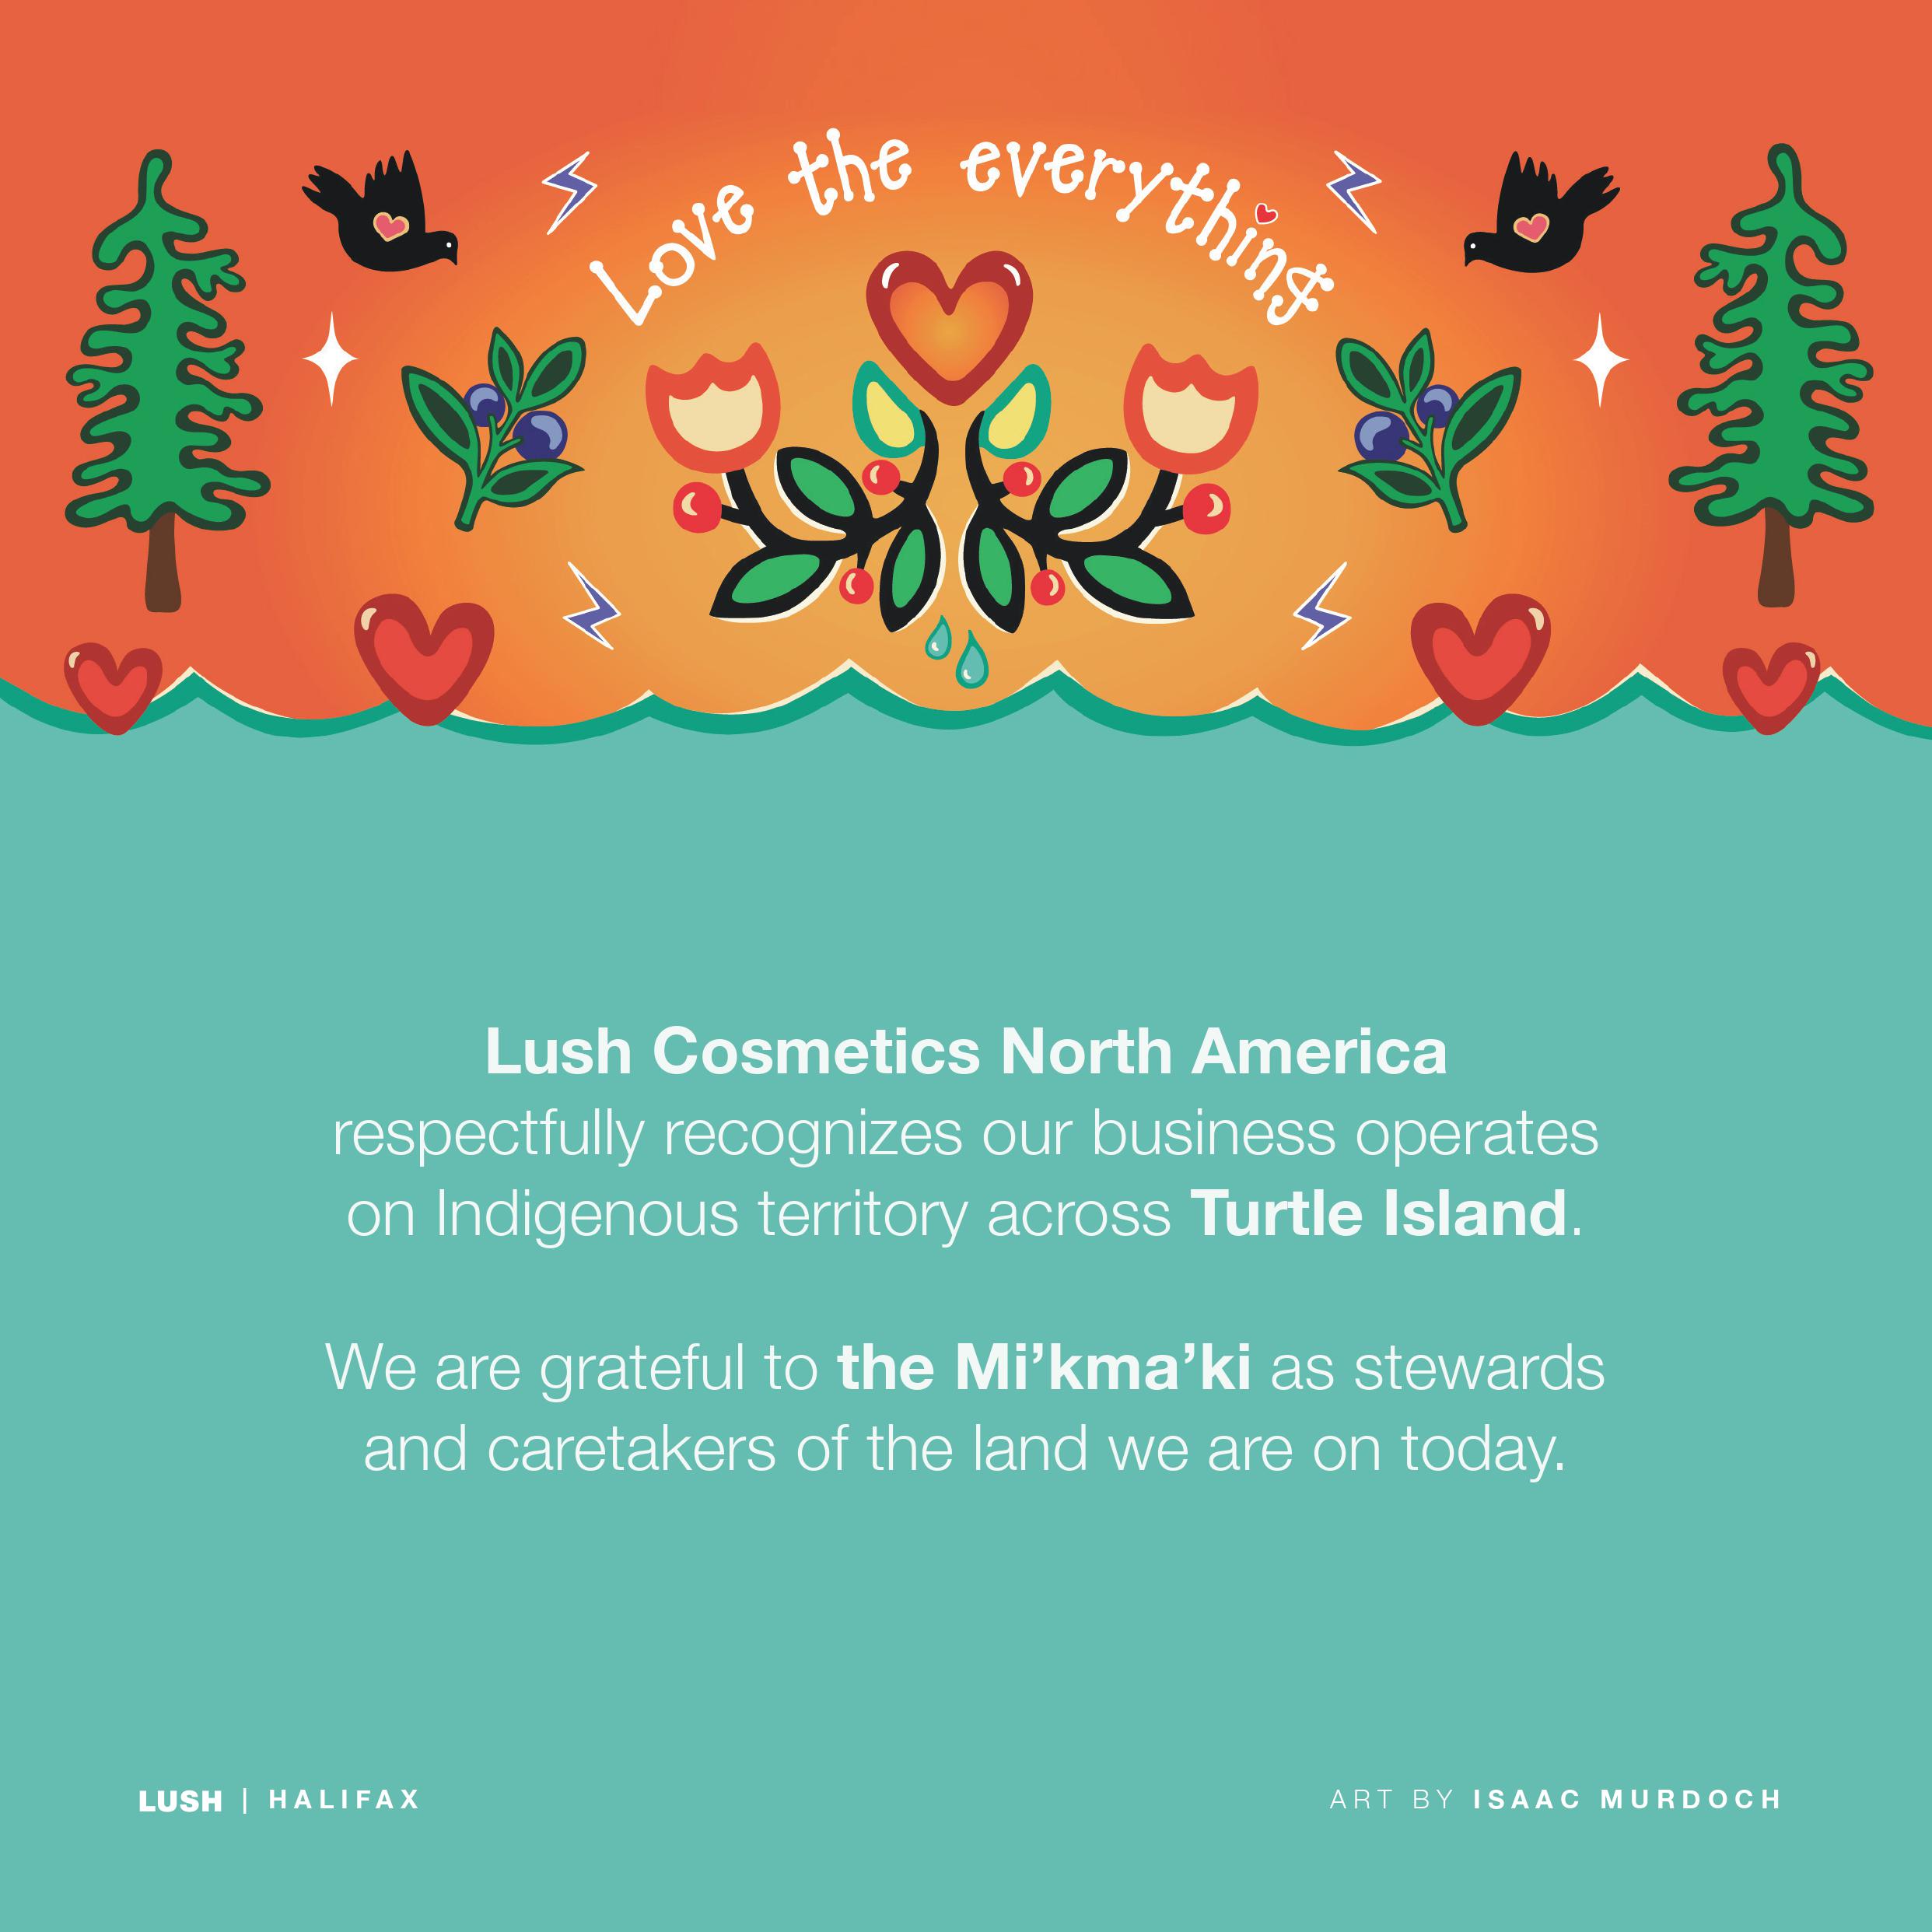 Lush Cosmetics North America respectfully recognizes our business operates on Indigenous territory a Lush Cosmetics Halifax Halifax (902)454-2007